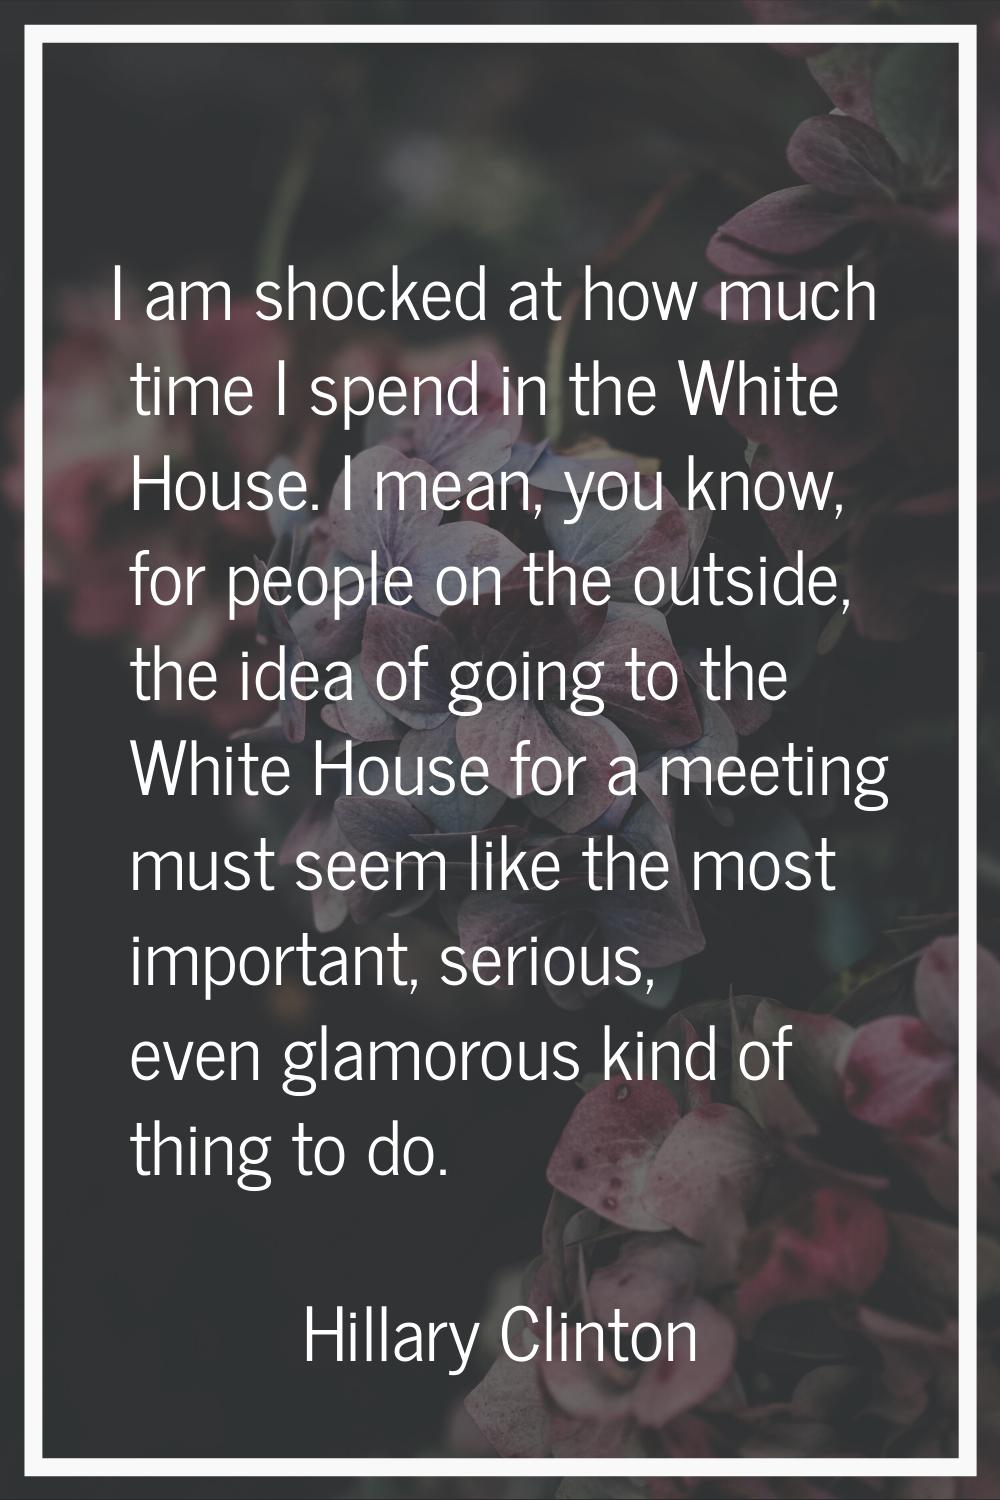 I am shocked at how much time I spend in the White House. I mean, you know, for people on the outsi